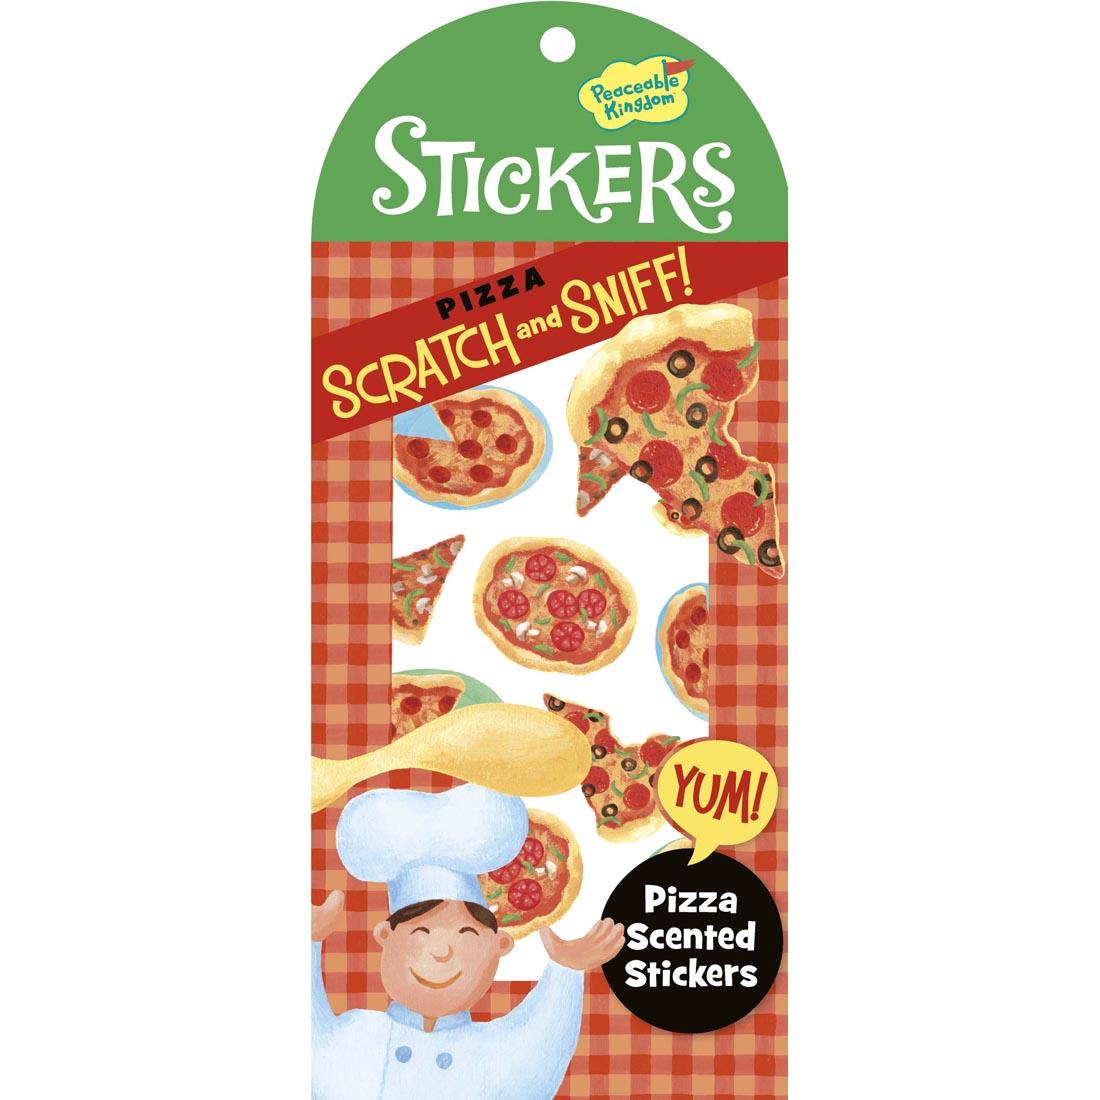 Pizza Scratch and Sniff Stickers by Peaceable Kingdom